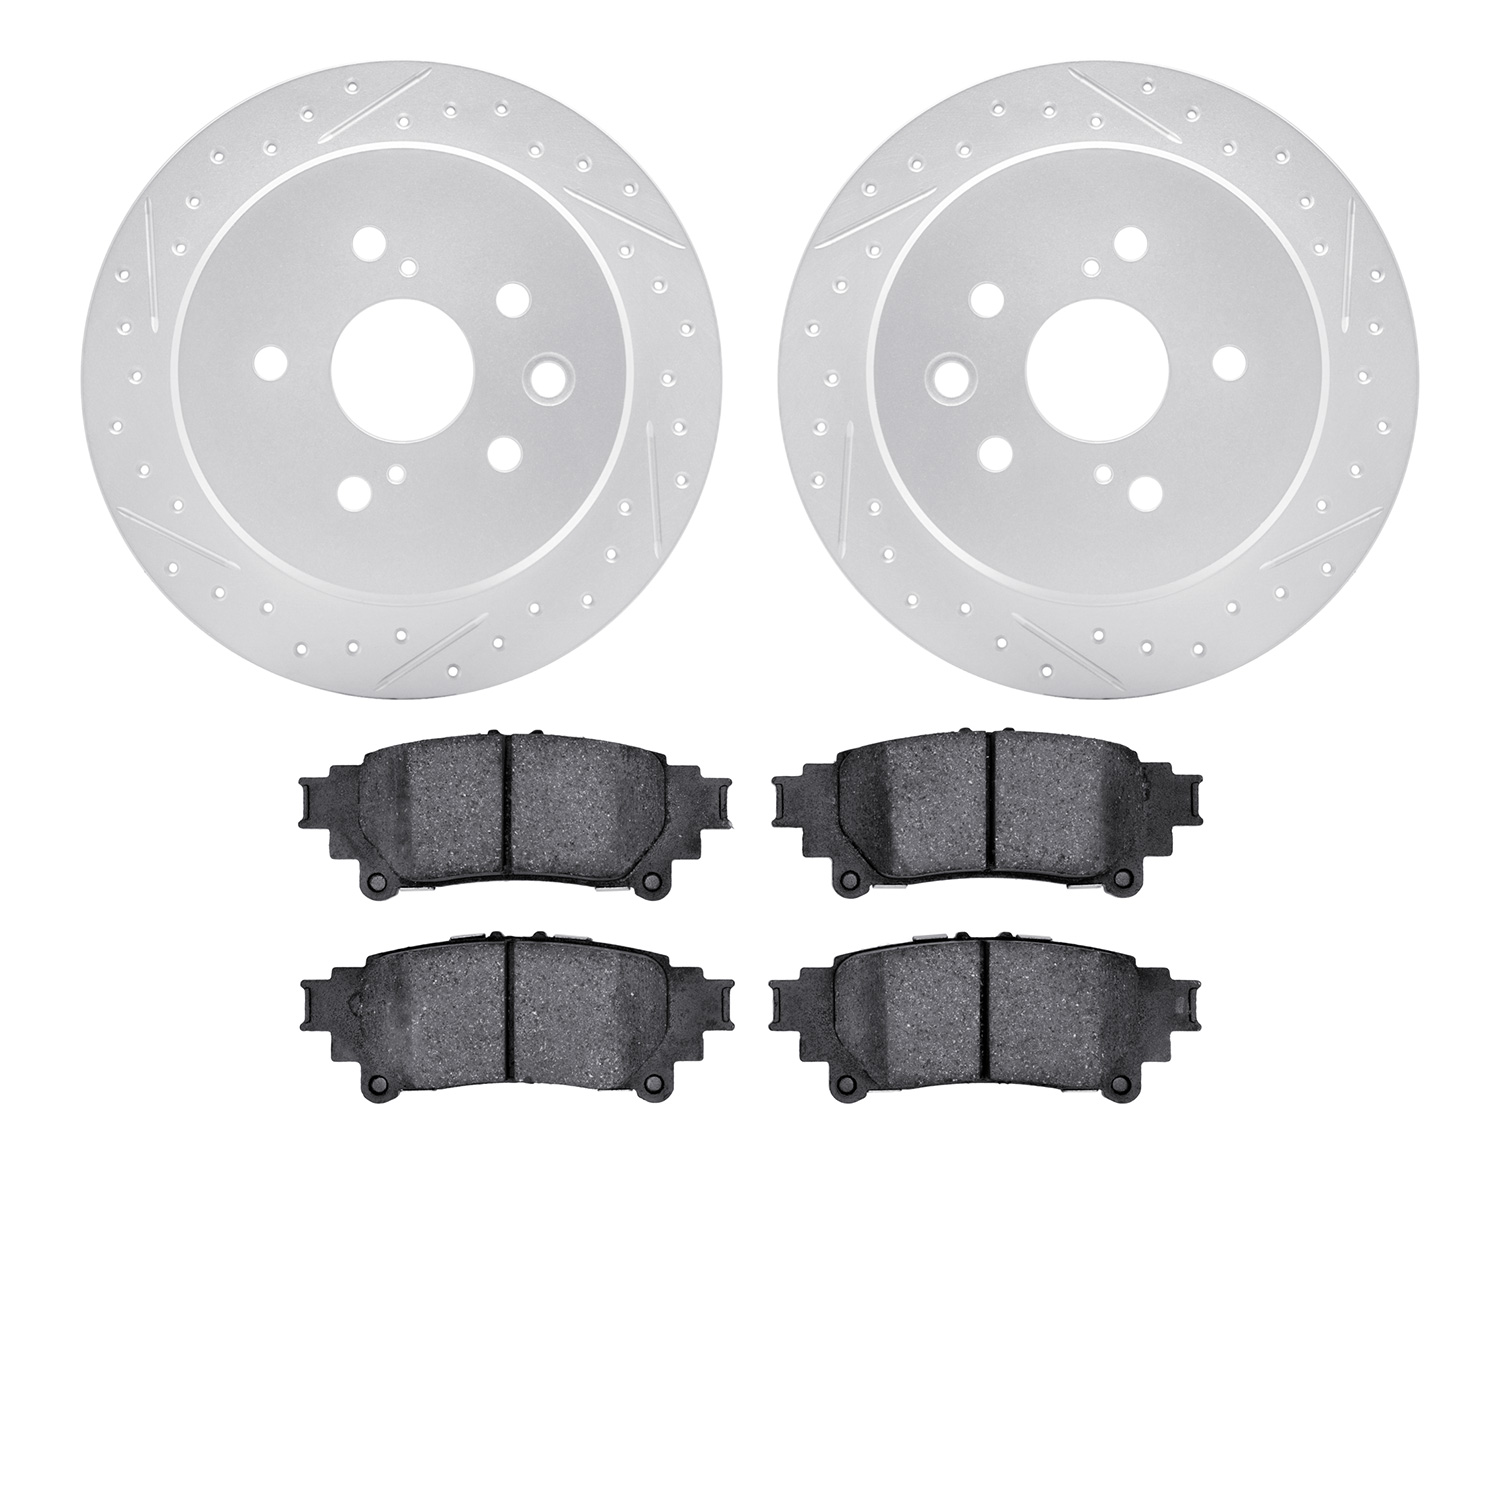 2502-75014 Geoperformance Drilled/Slotted Rotors w/5000 Advanced Brake Pads Kit, 2014-2015 Lexus/Toyota/Scion, Position: Rear